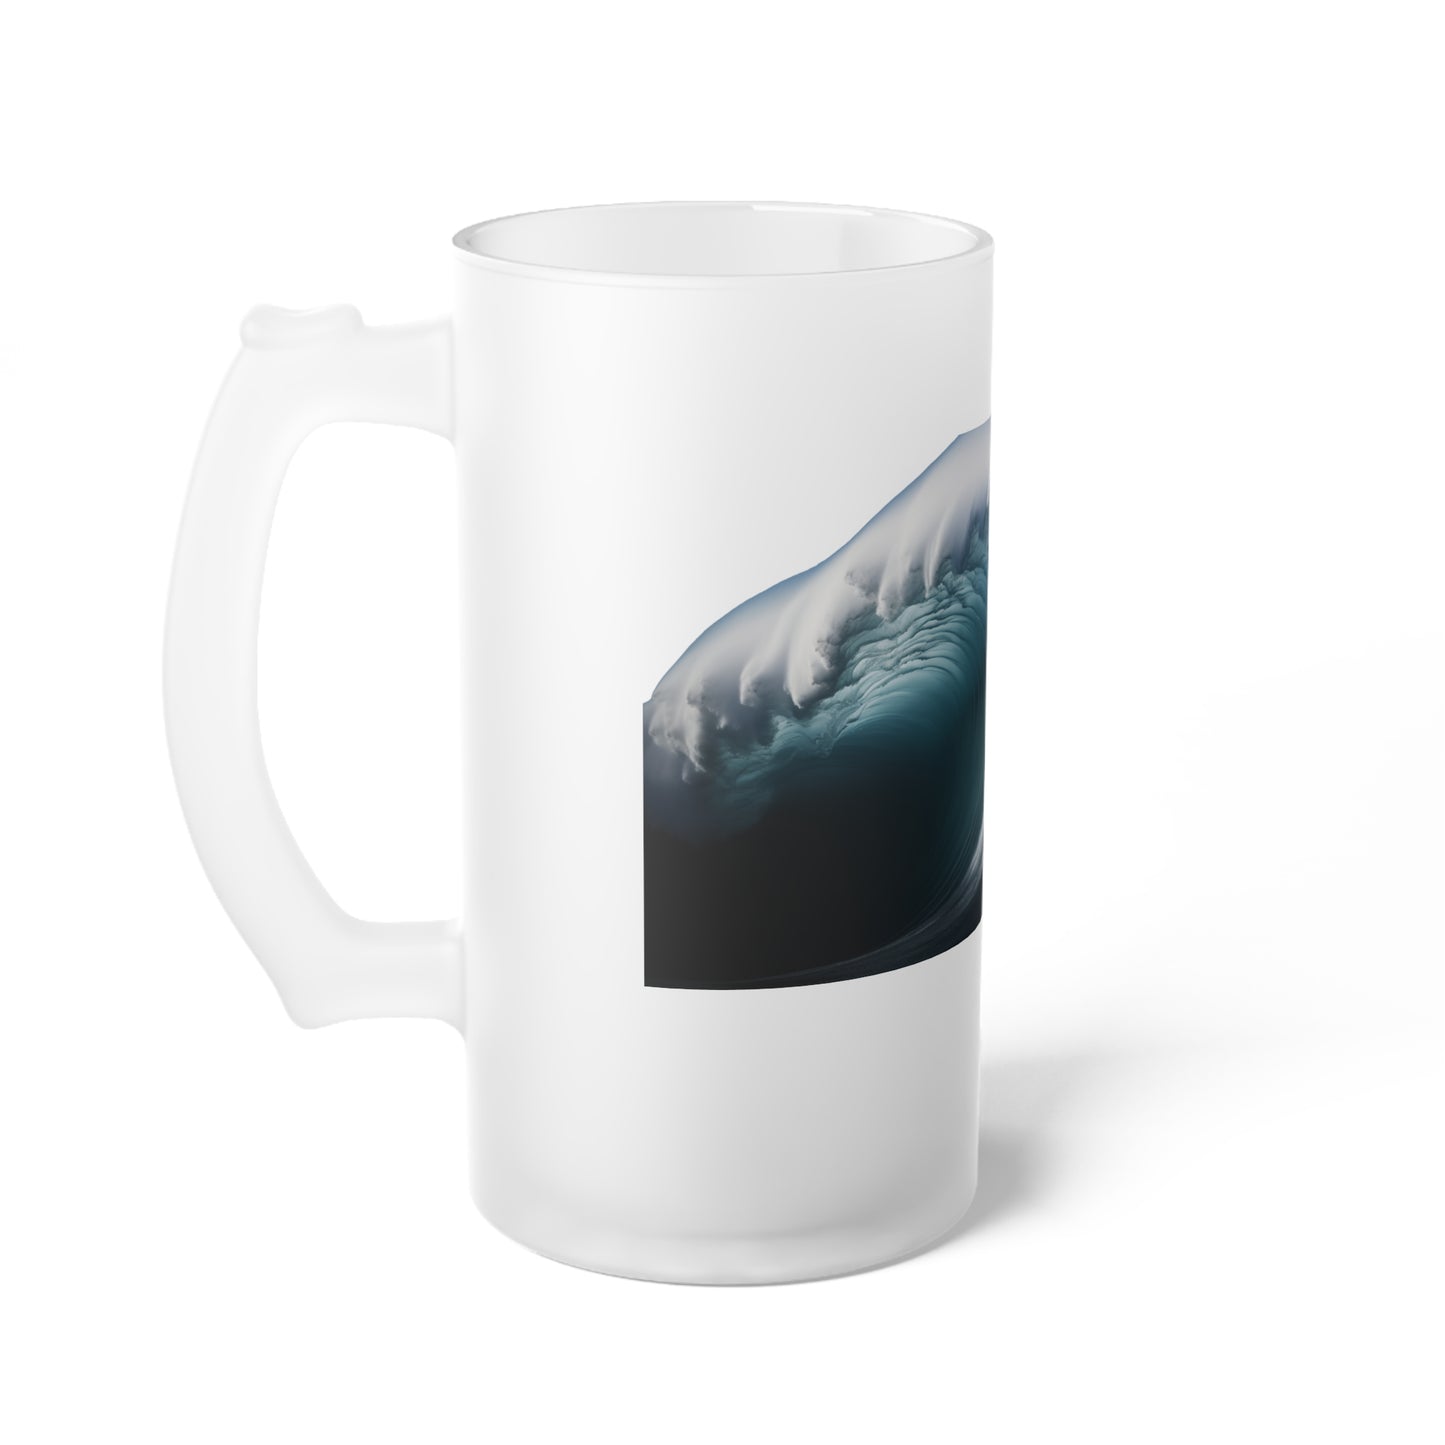 Embrace the Power: Surfer Charging a 61-Foot Giant Wave Frosted Beer Mug - Waves Design #061. Feel the thrill as you sip your favorite brew, celebrating the surfer's bravery in the face of nature's might. 🏄‍♂️🍺 #SurferCourage #GiantWaveMug #StashboxGlassware